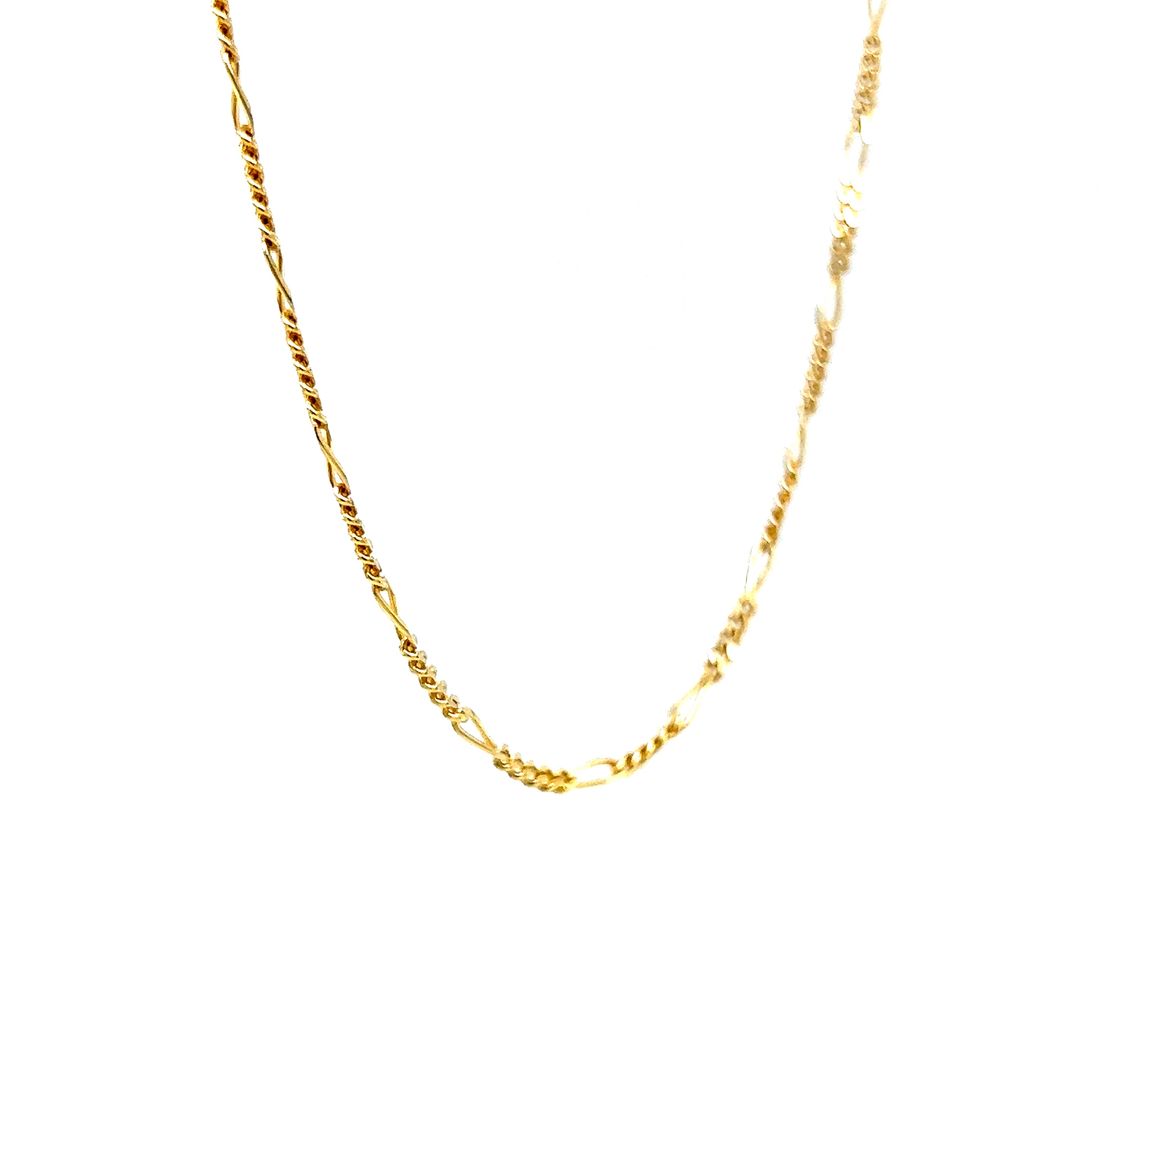 Modern 19 Inch Chain Necklace in 14k Yellow Gold